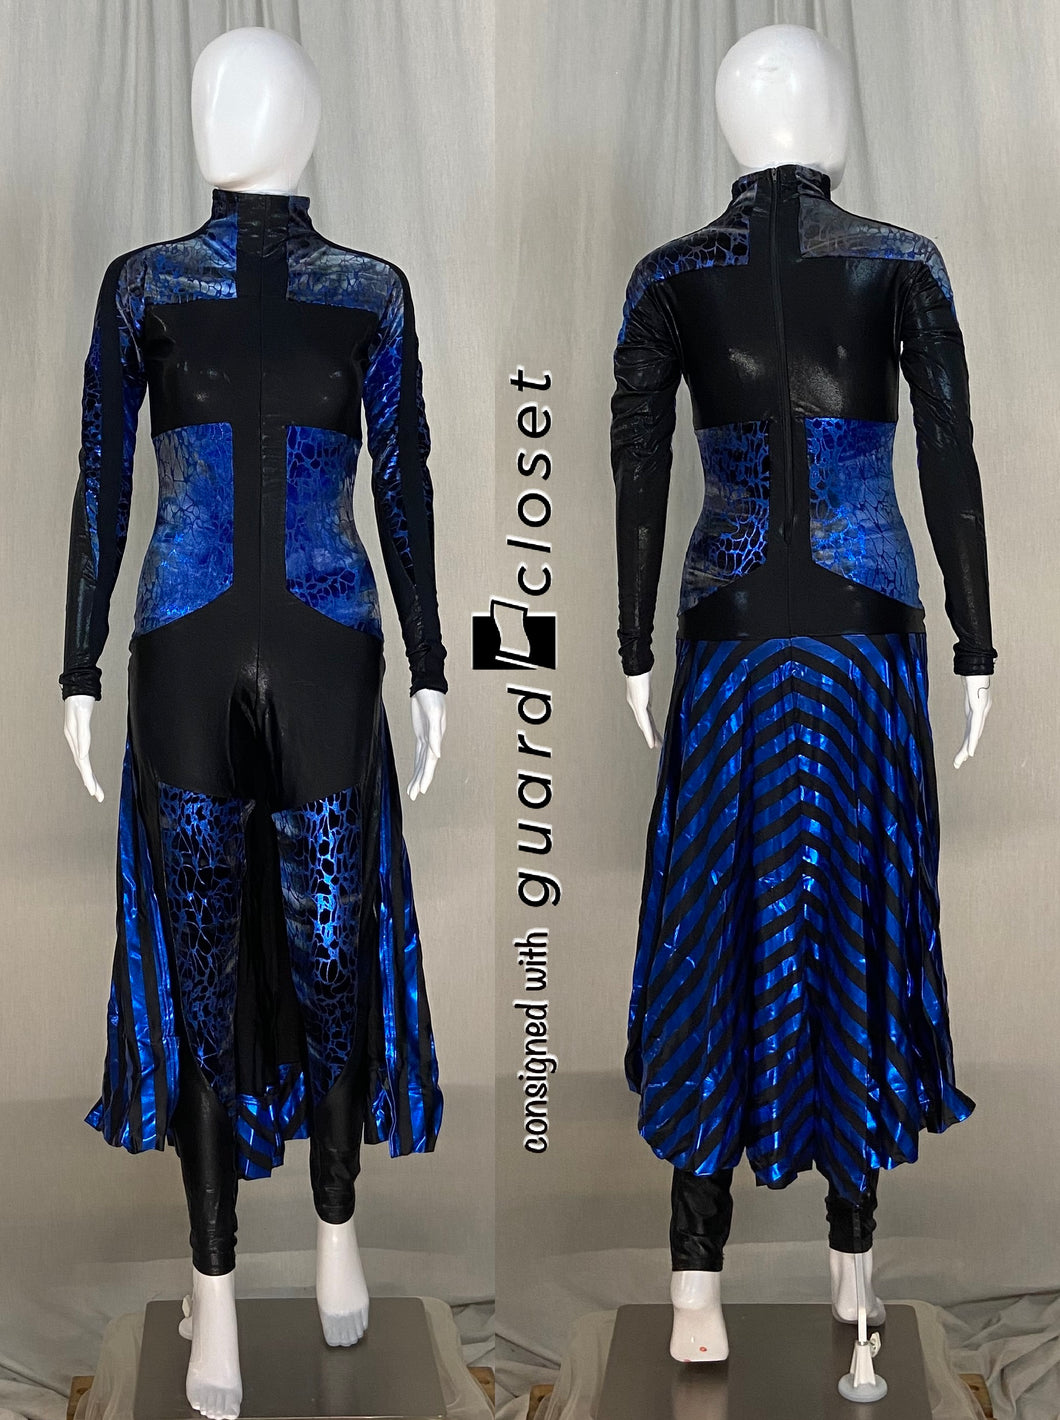 39 blue black long sleeve skirted FJM unitards + 20 solid black hooded capes + 14 blue silver striped hooded capes